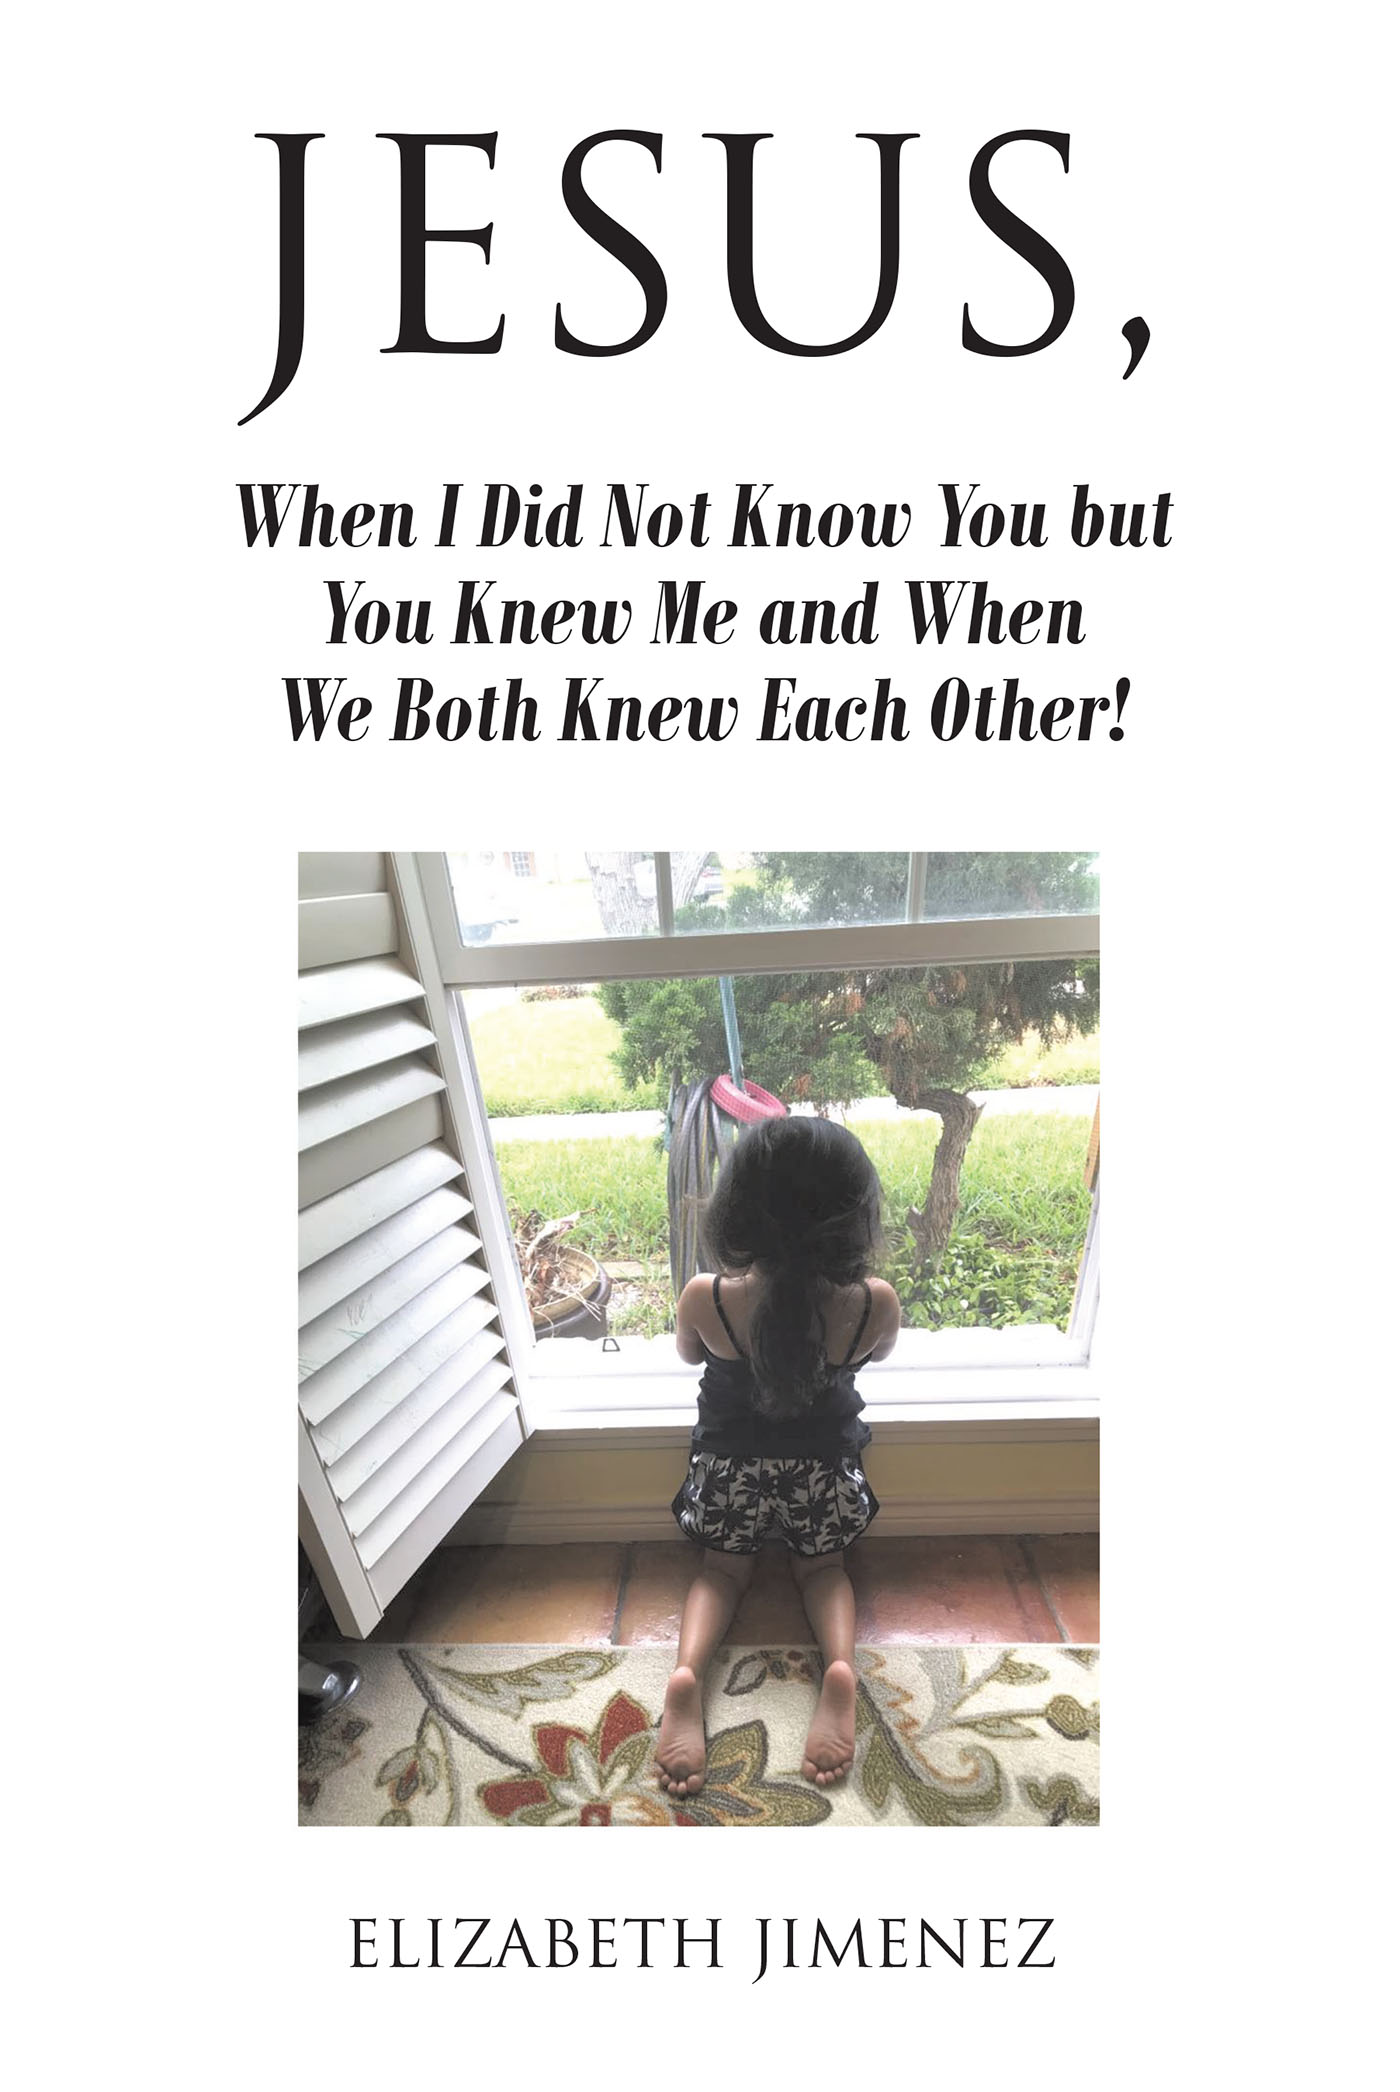 Elizabeth Jimenez’s Newly Released “Jesus, When I Did Not Know You but You Knew Me and When We Both Knew Each Other!” is a Potent Prayer of Thankfulness